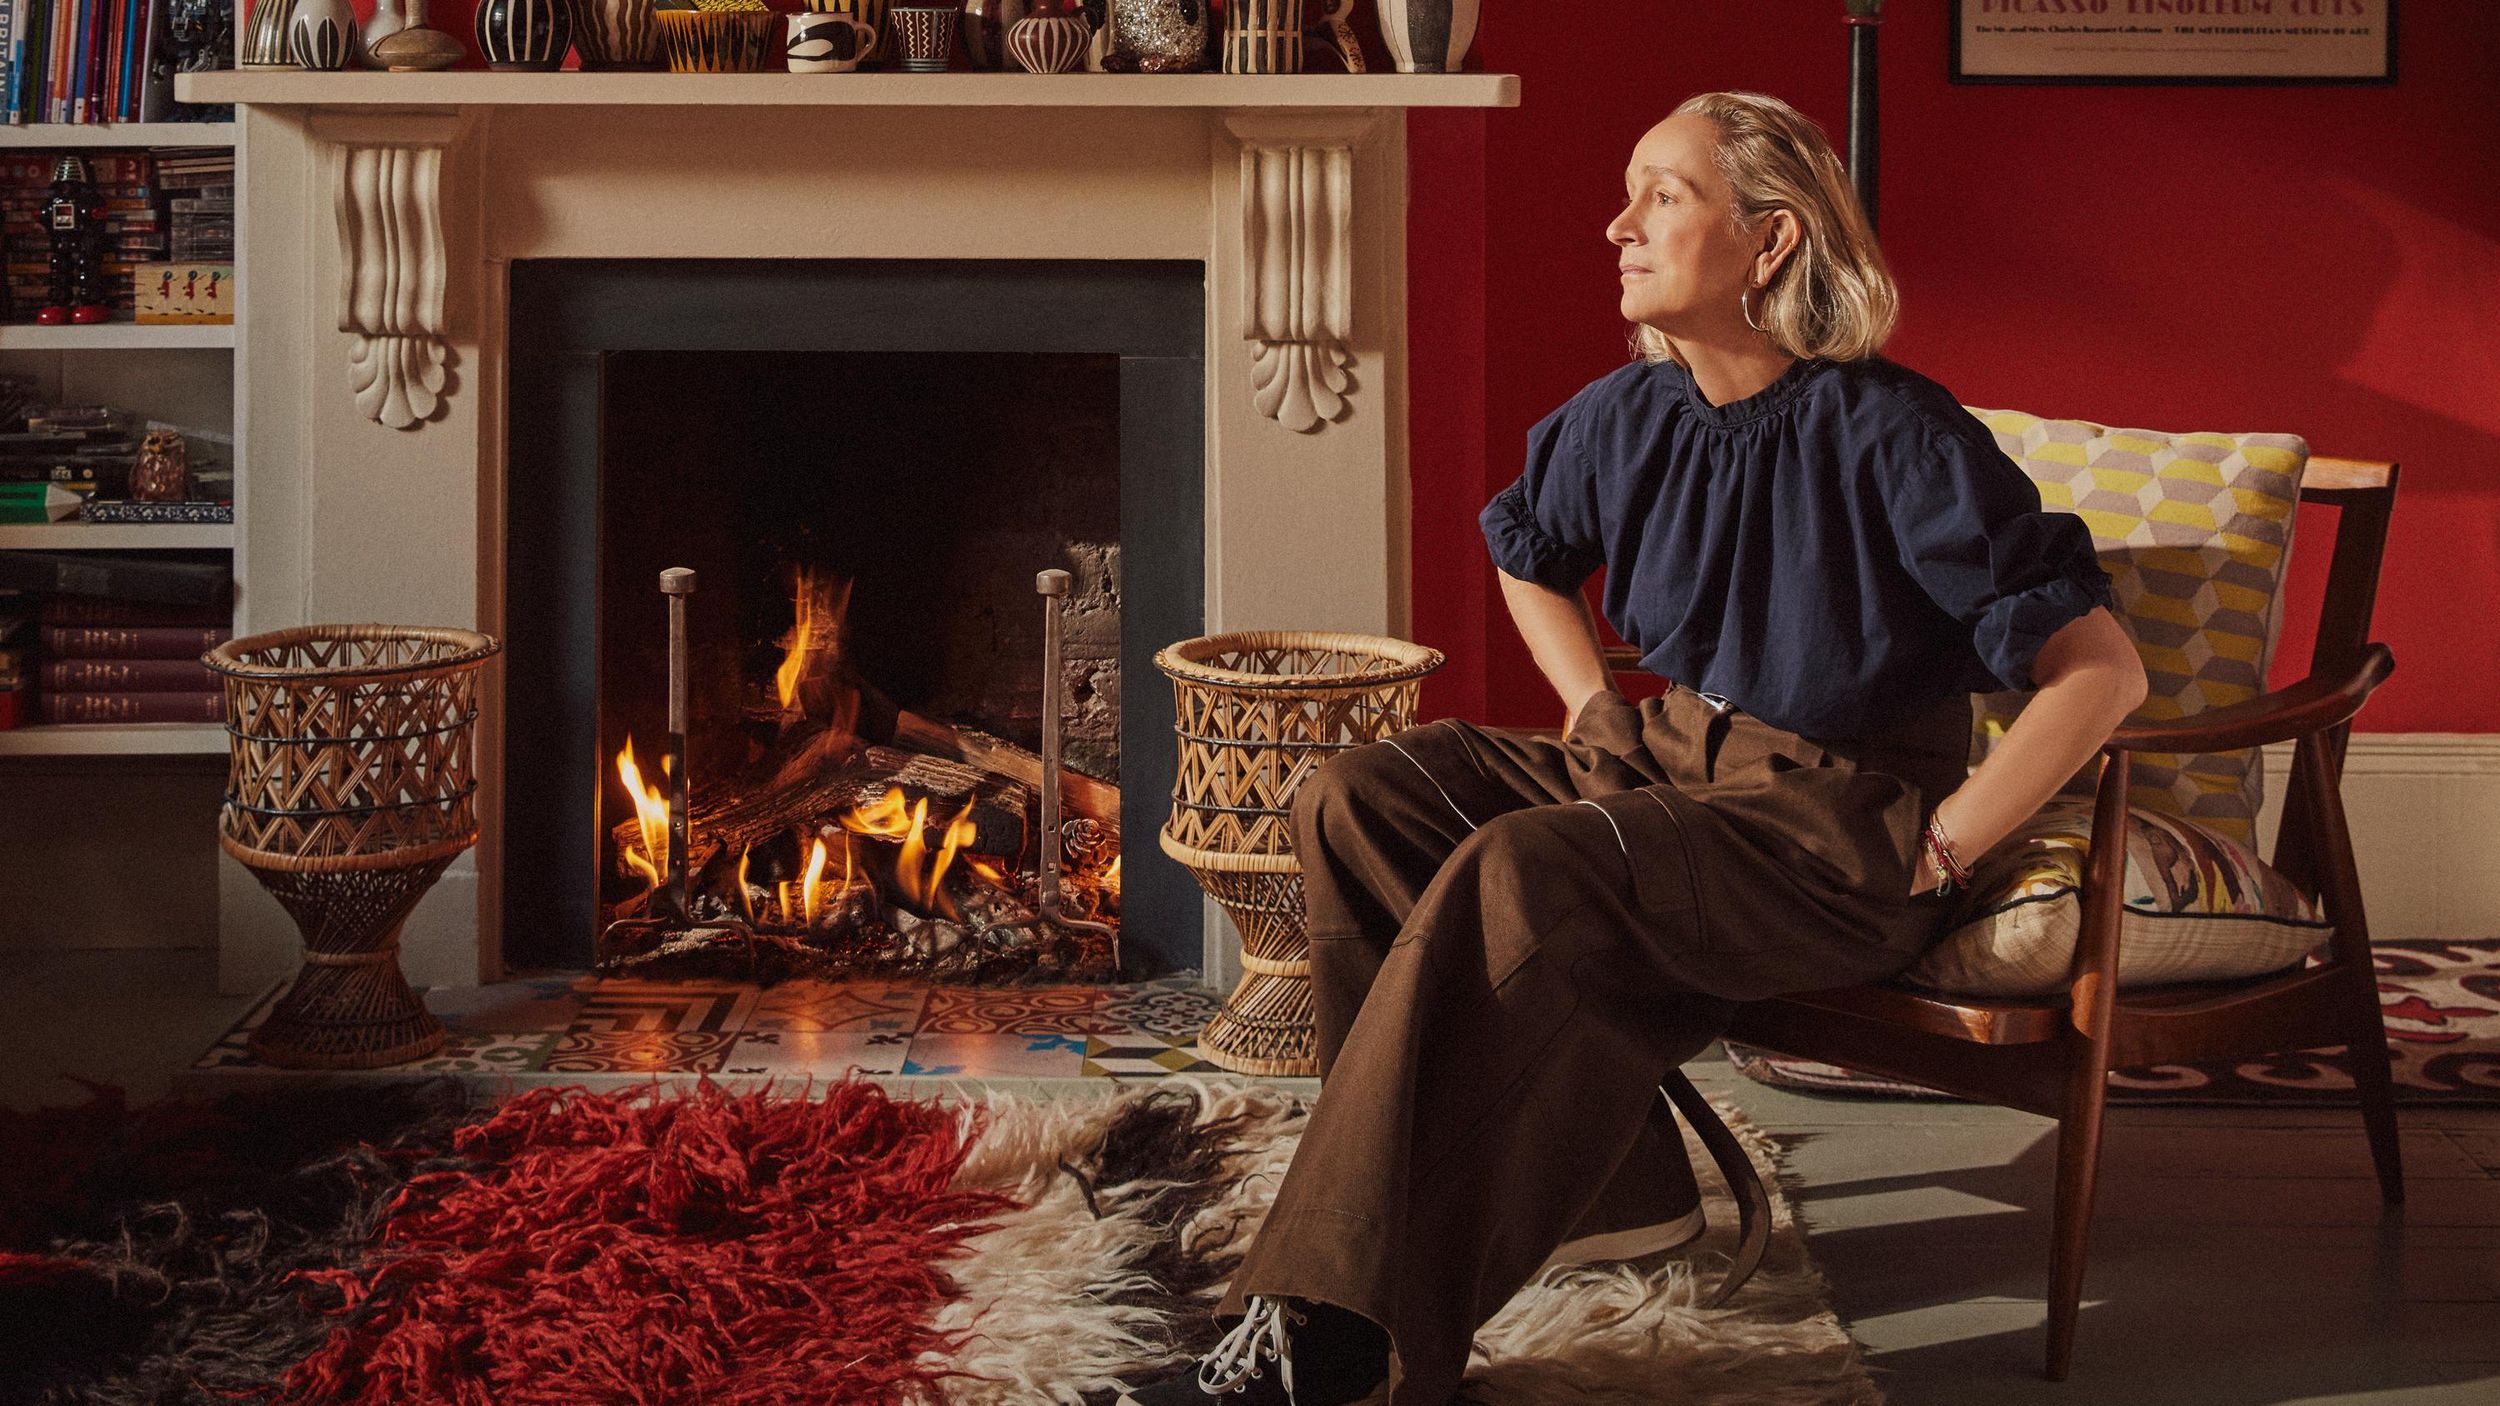 You Can Learn A Lot About Lucinda Chambers From Her Shelves